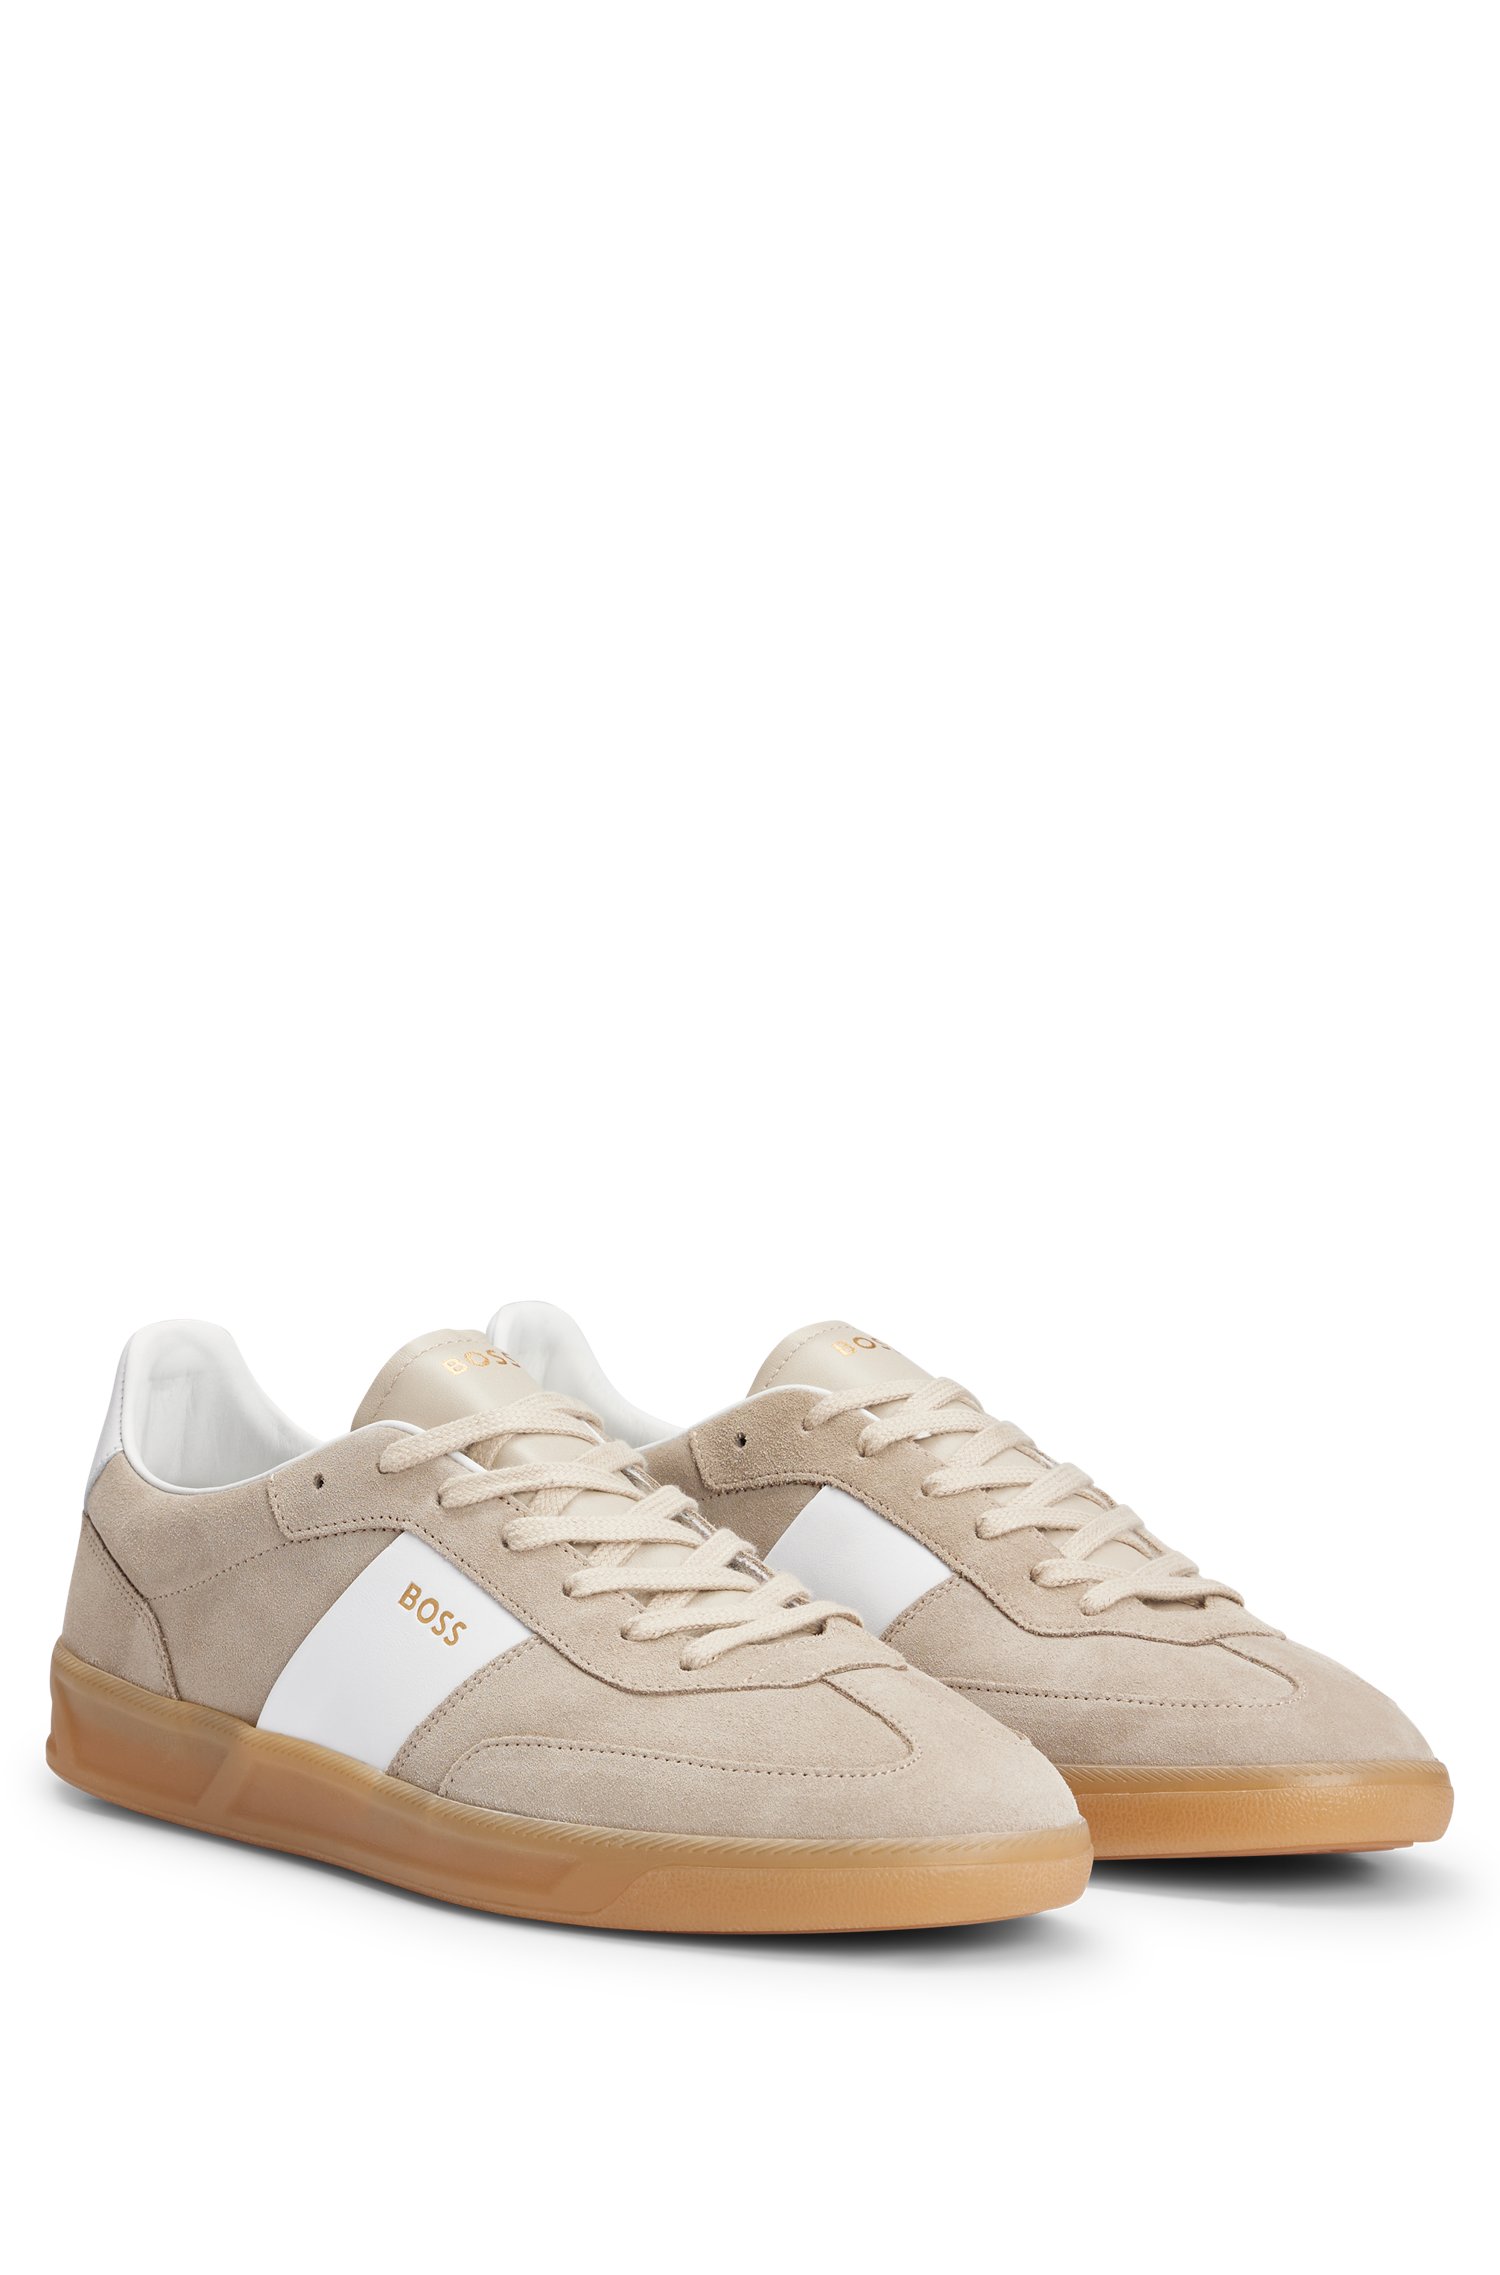 Suede-leather lace-up trainers with branding